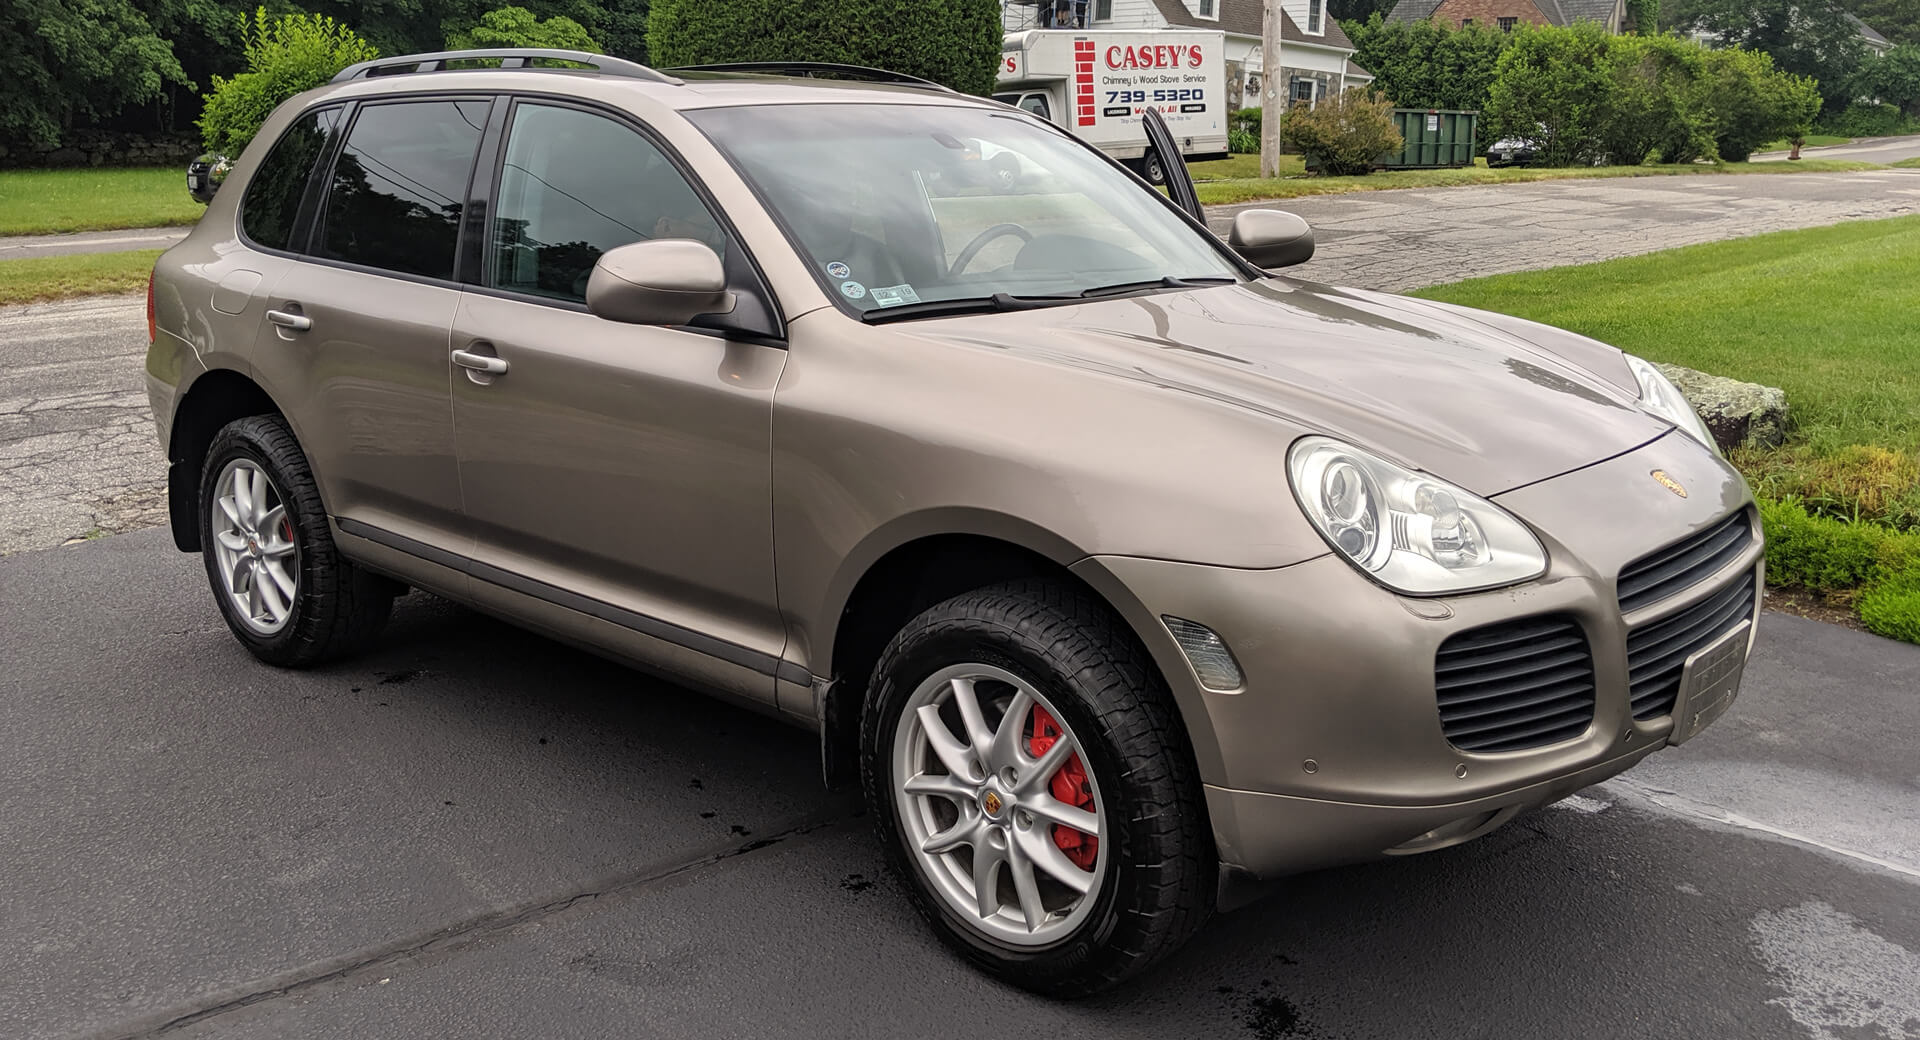 How Much Did It Cost To Maintain A 2004 Porsche Cayenne Turbo For A Year?